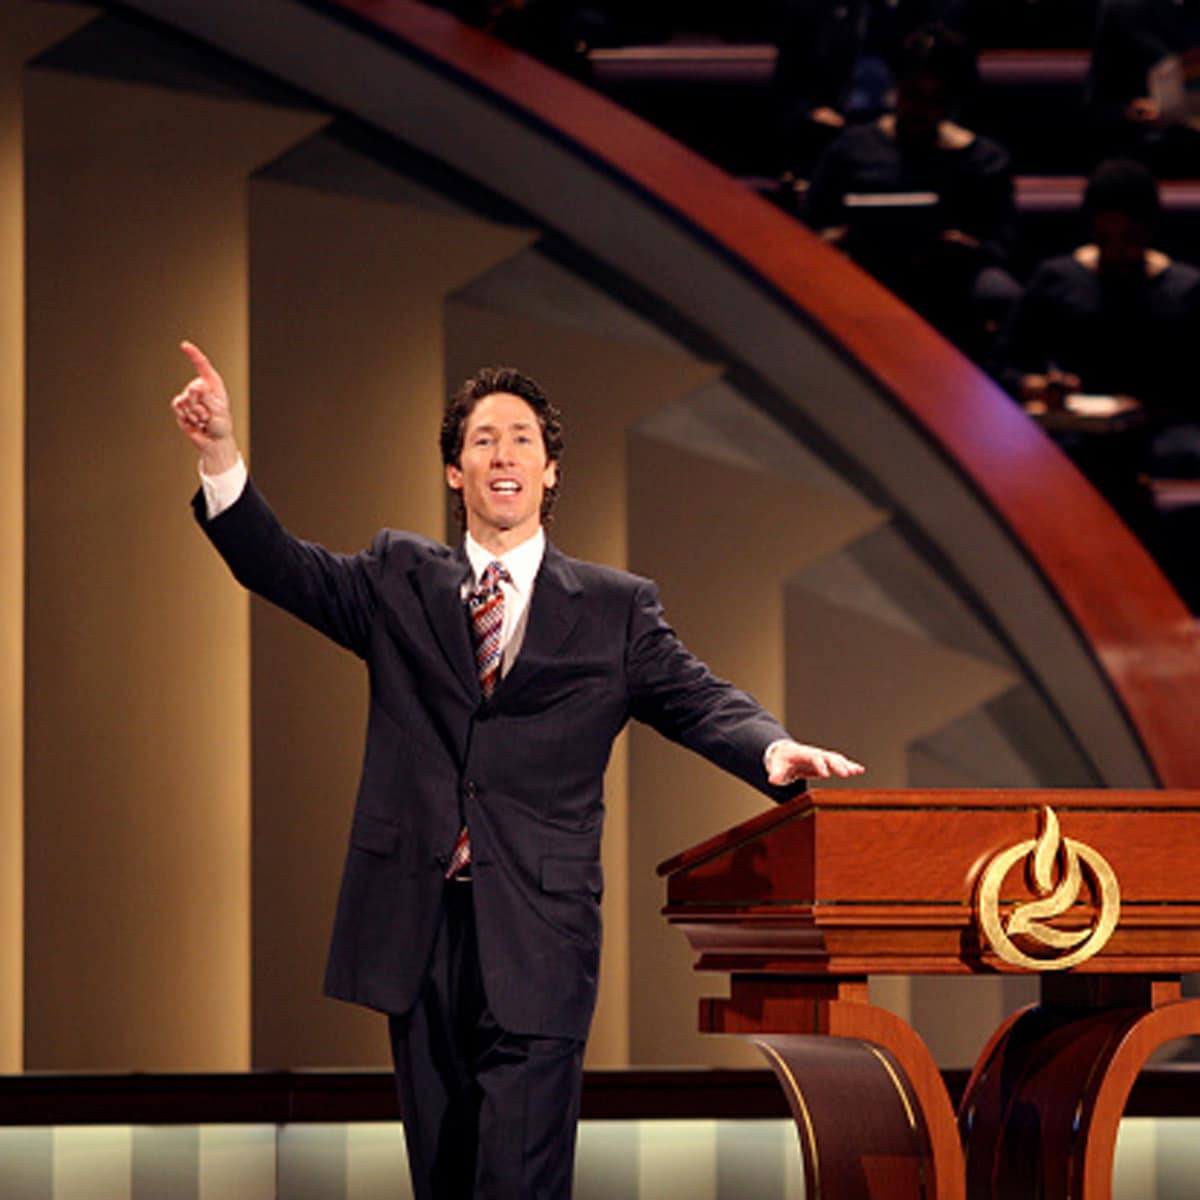 Pastor Joel Osteen preaches to some 25,000 people each week